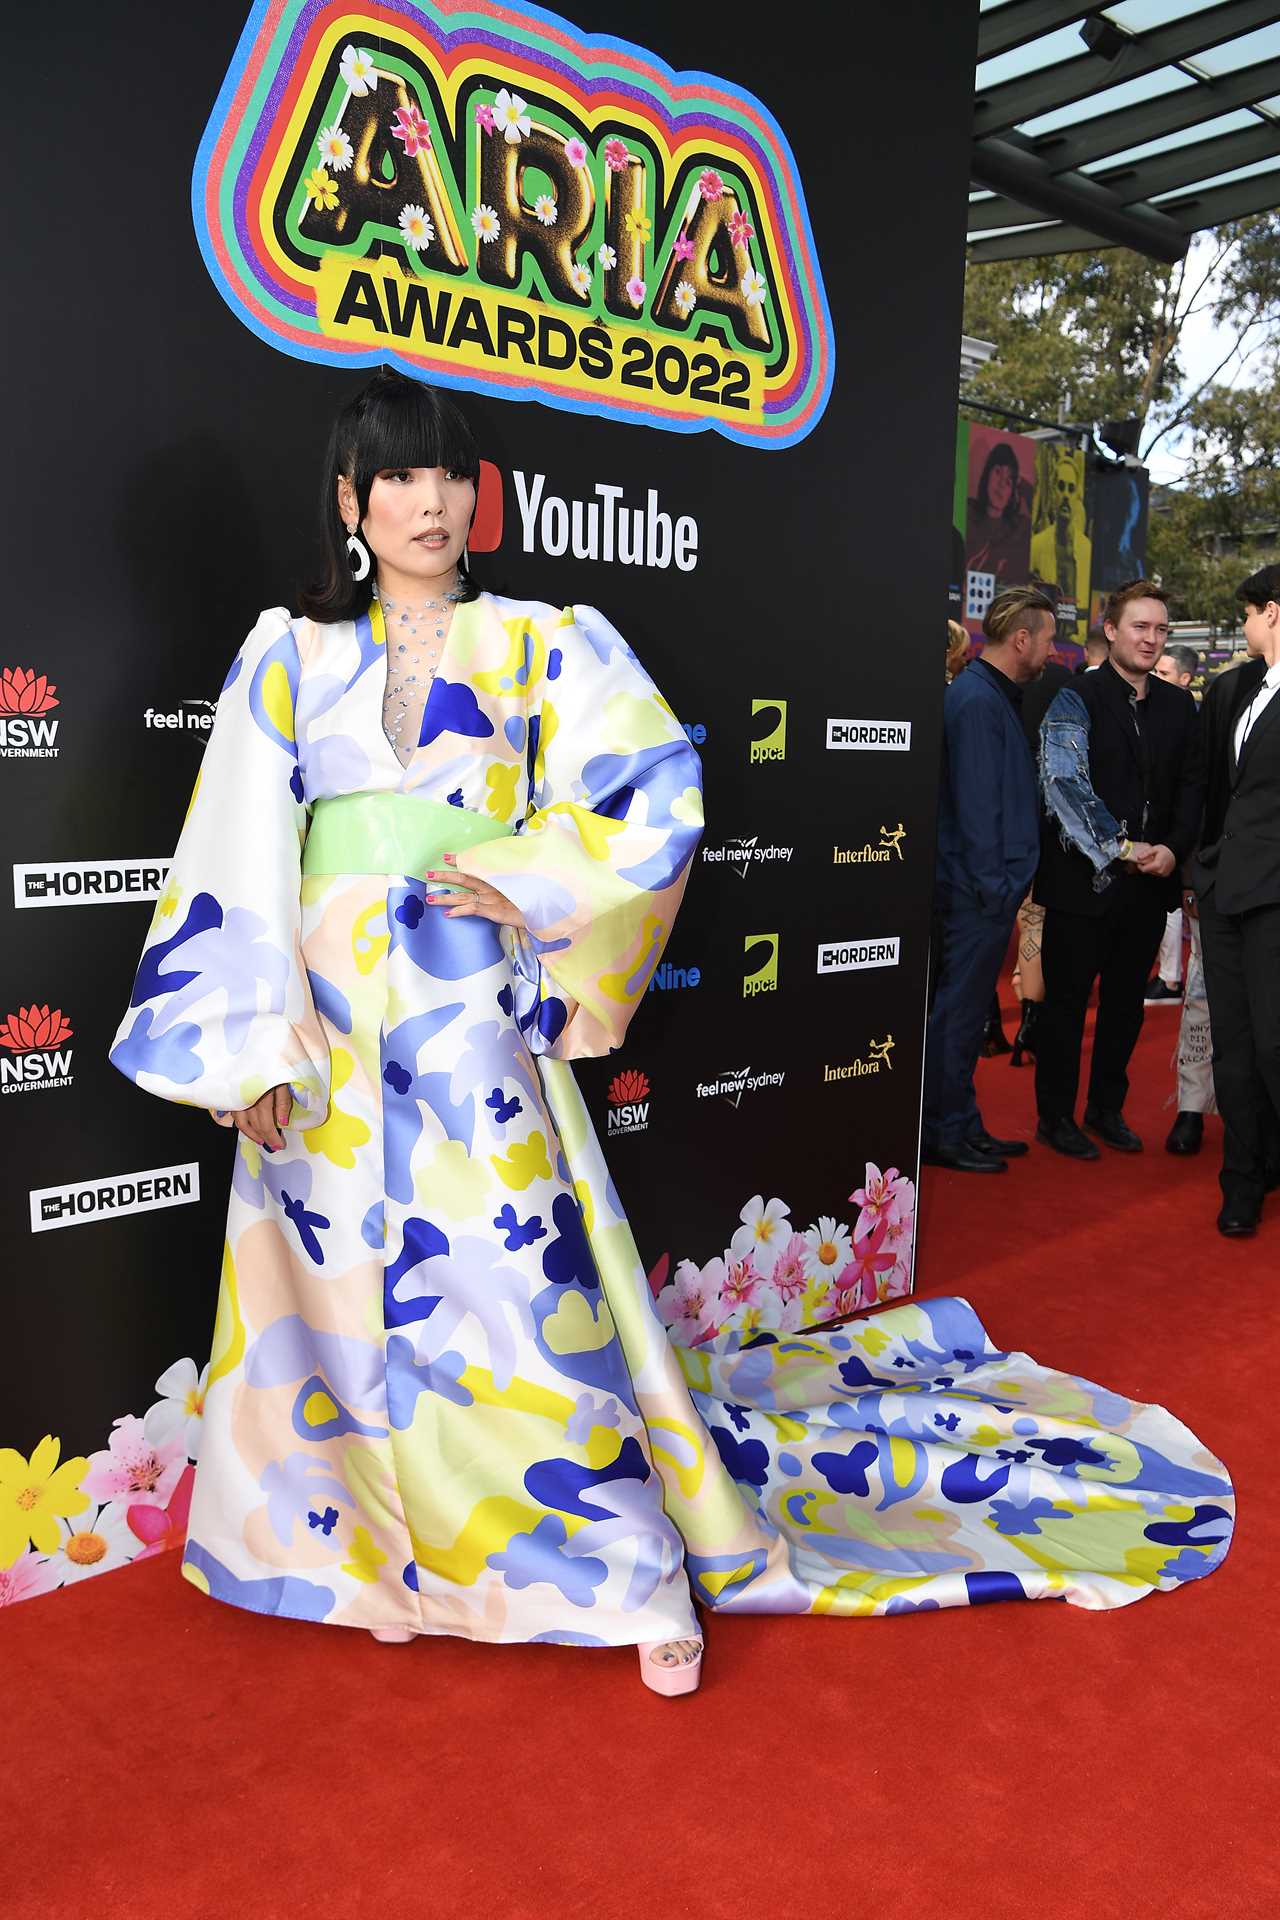 'It's like a little festival on the street': All the red-carpet action from the ARIA awards